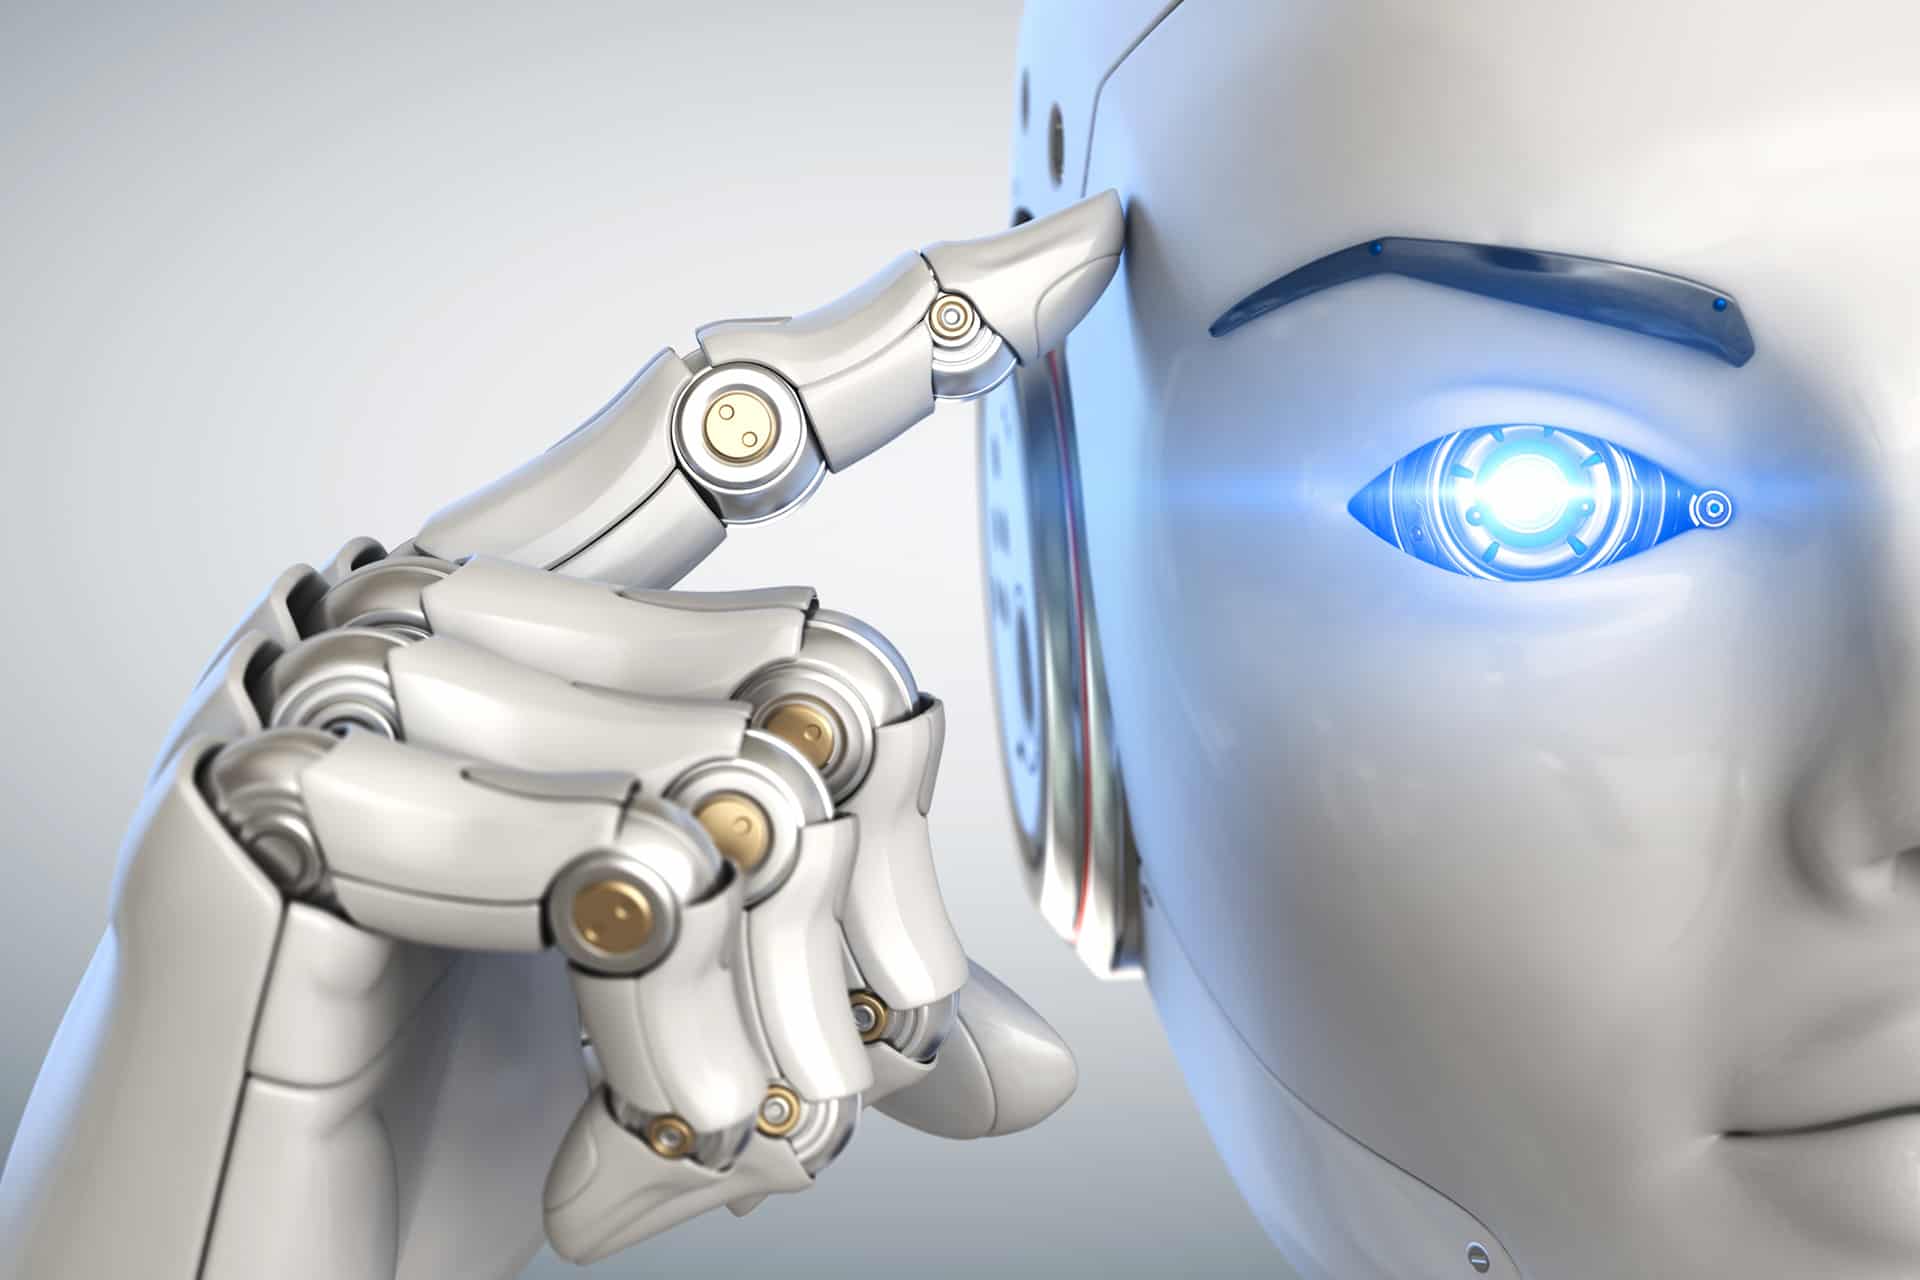 Robot with blue eyes holding its finger pointing its mind, image of science & technology category from Harvesting Happiness Talk Radio, a podcast dedicated to health & wellness.